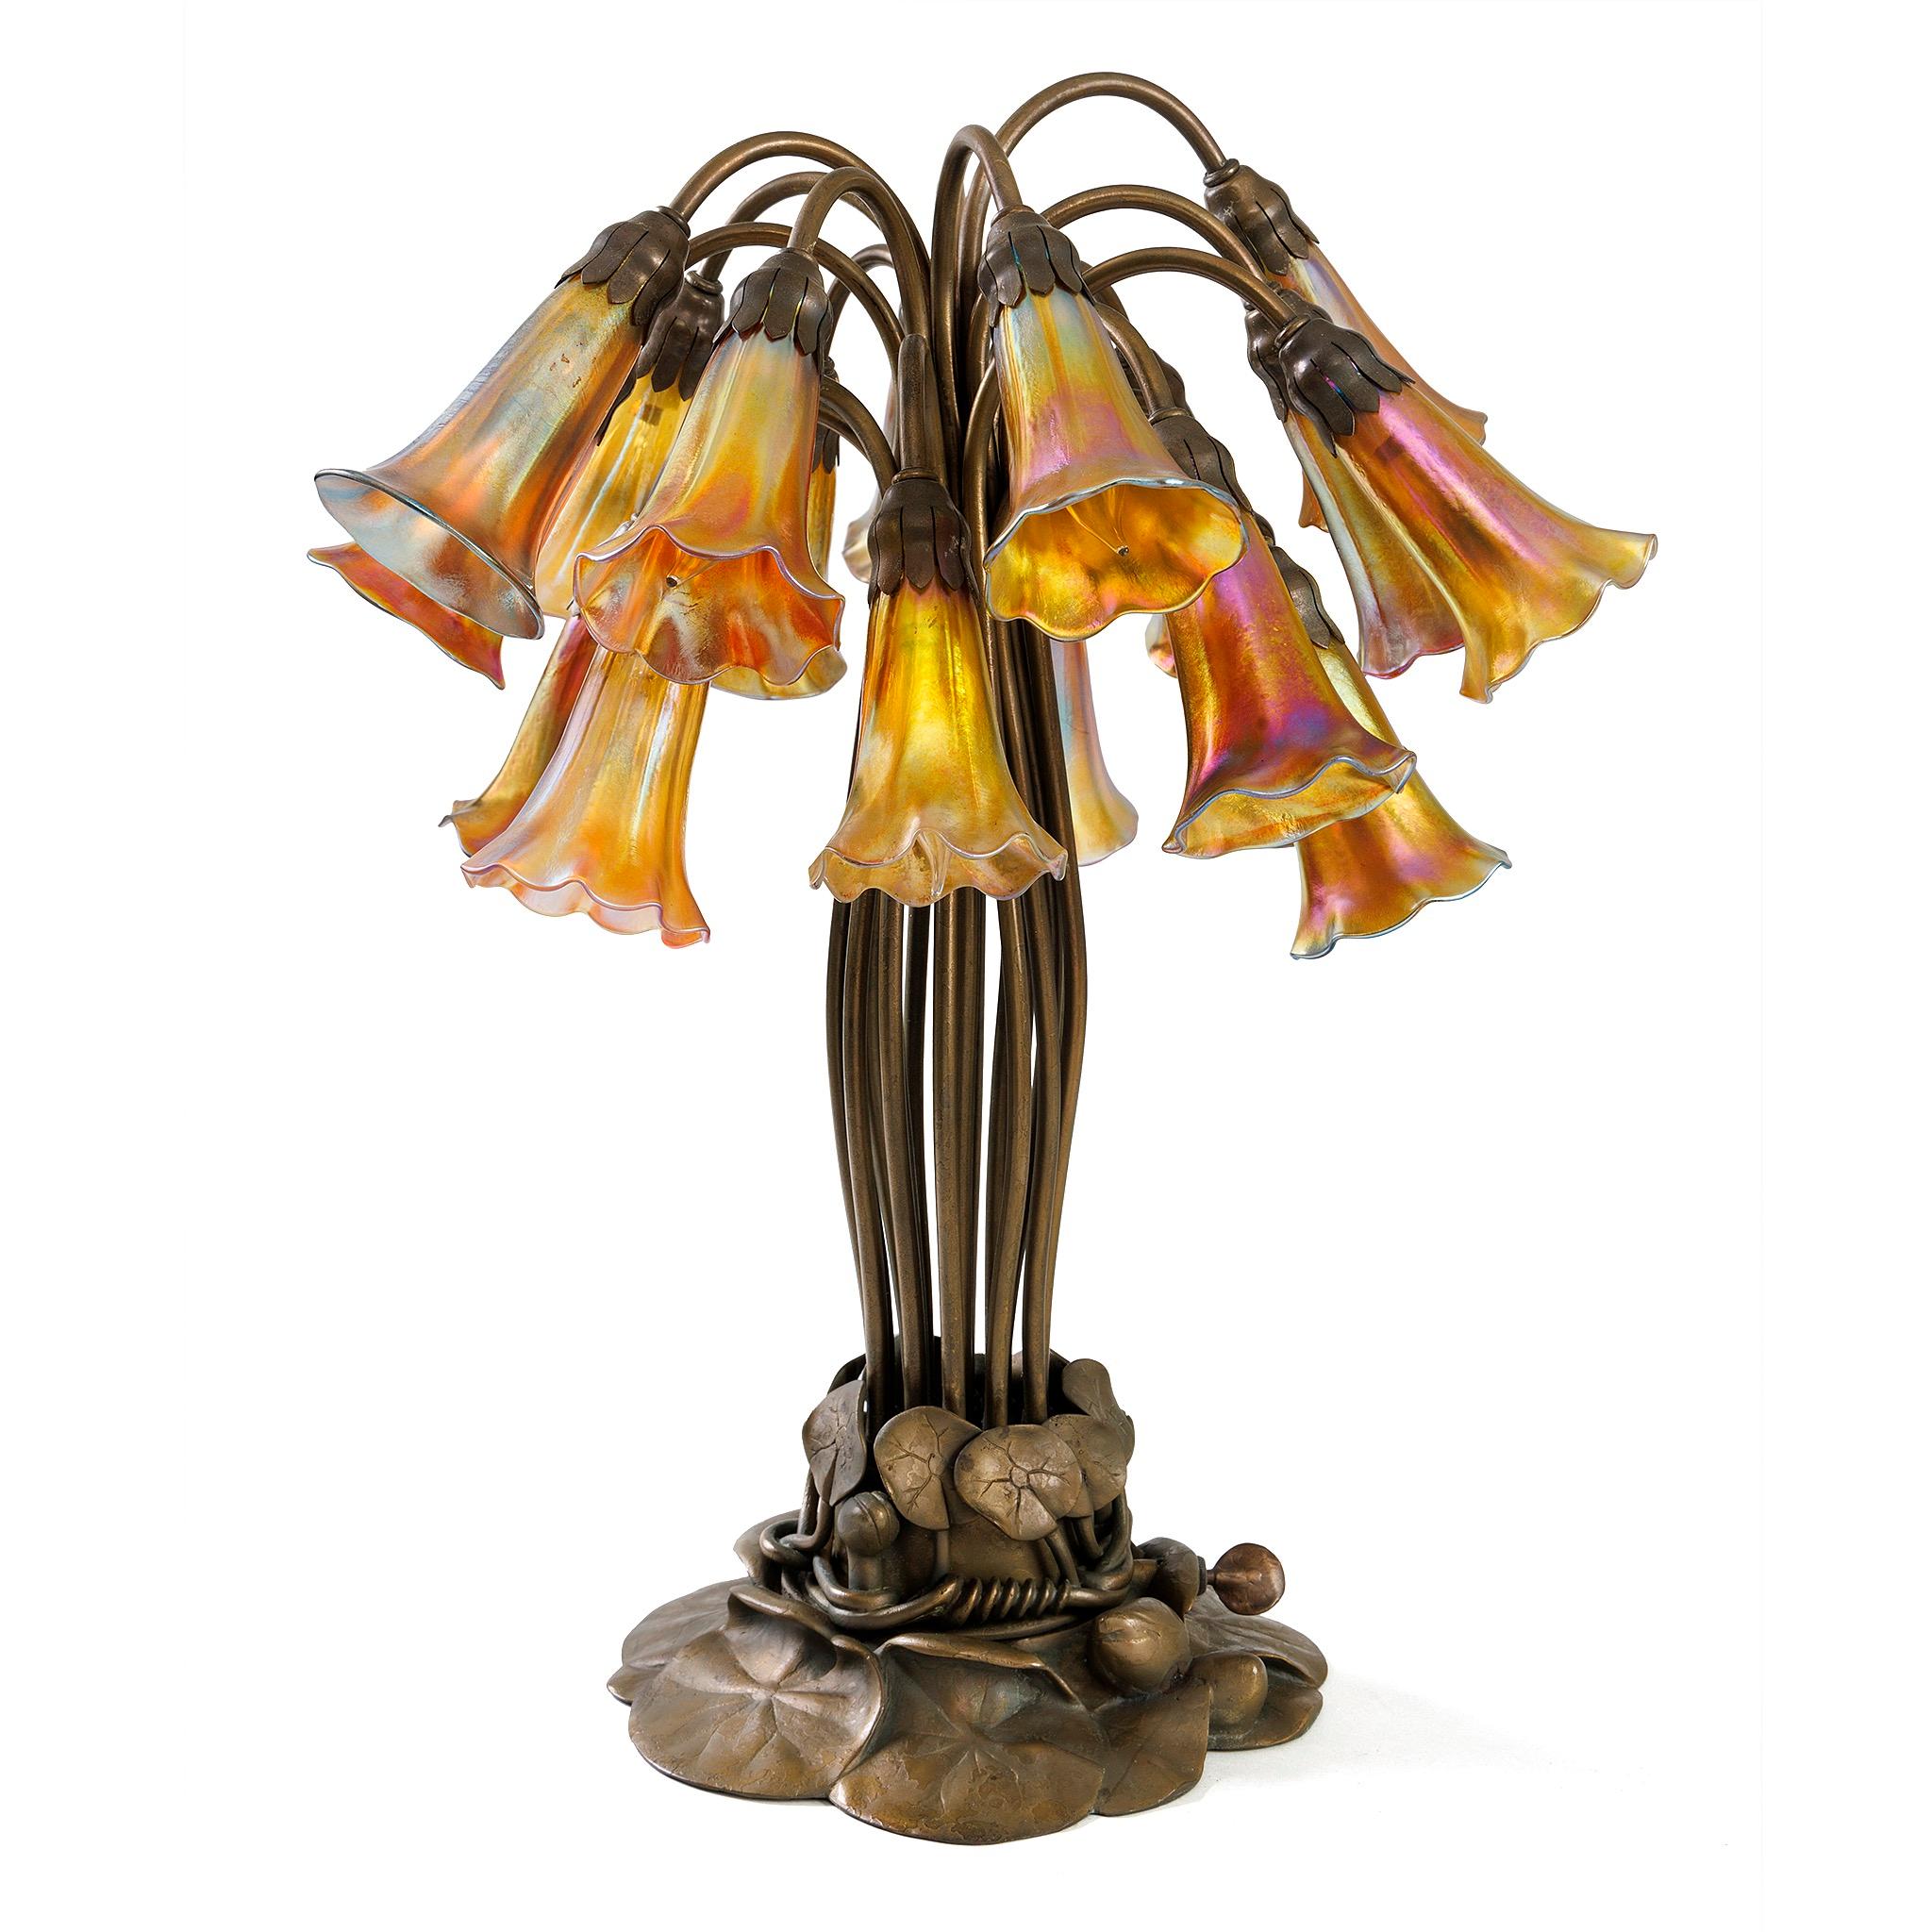 This Tiffany Studios New York glass and patinated bronze 